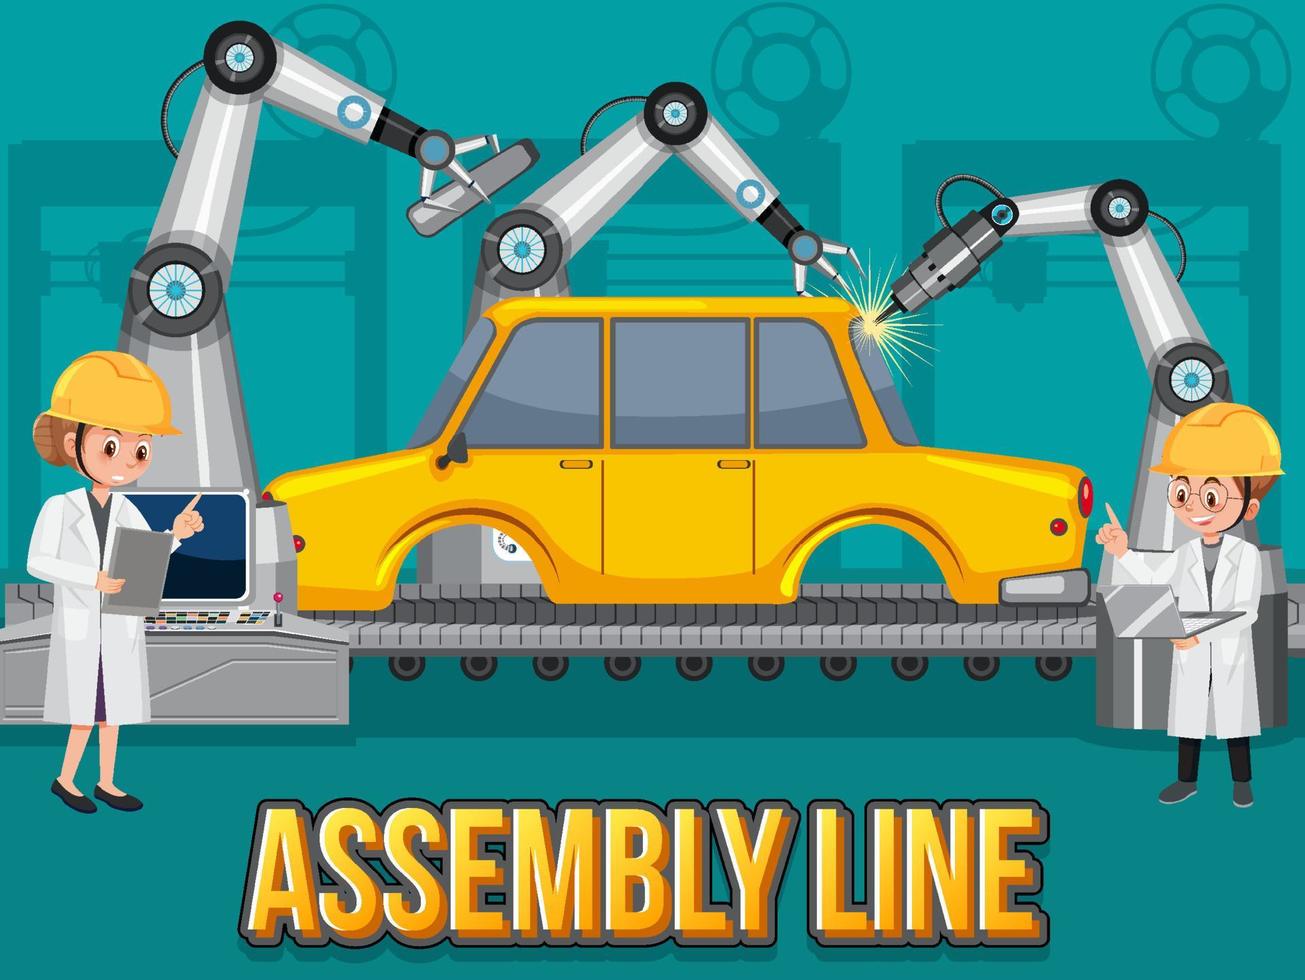 Production process concept with assembly line banner design vector